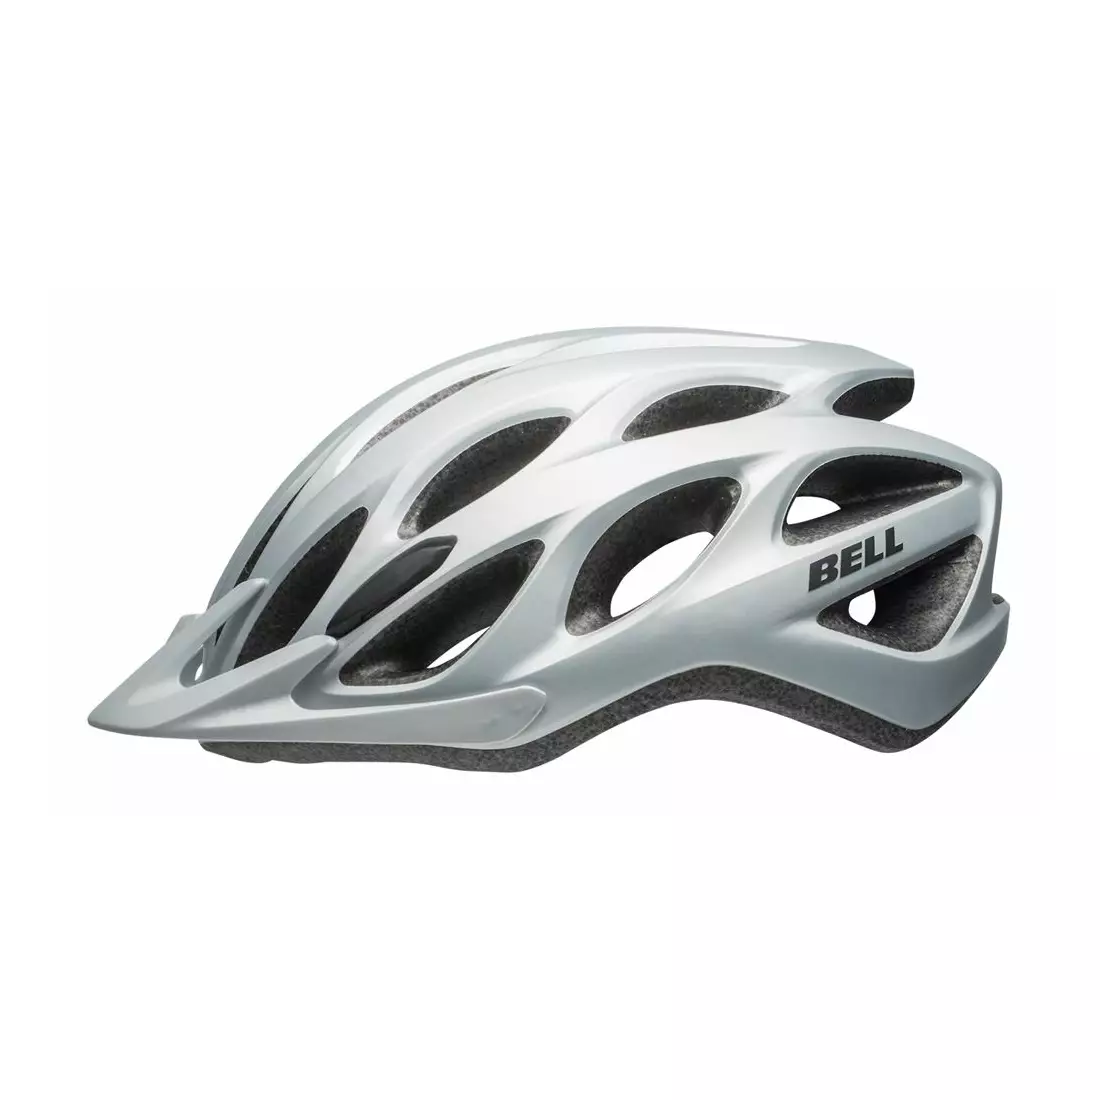 BELL kask rowerowy mtb CHARGER matte silver titanium BEL-7082038